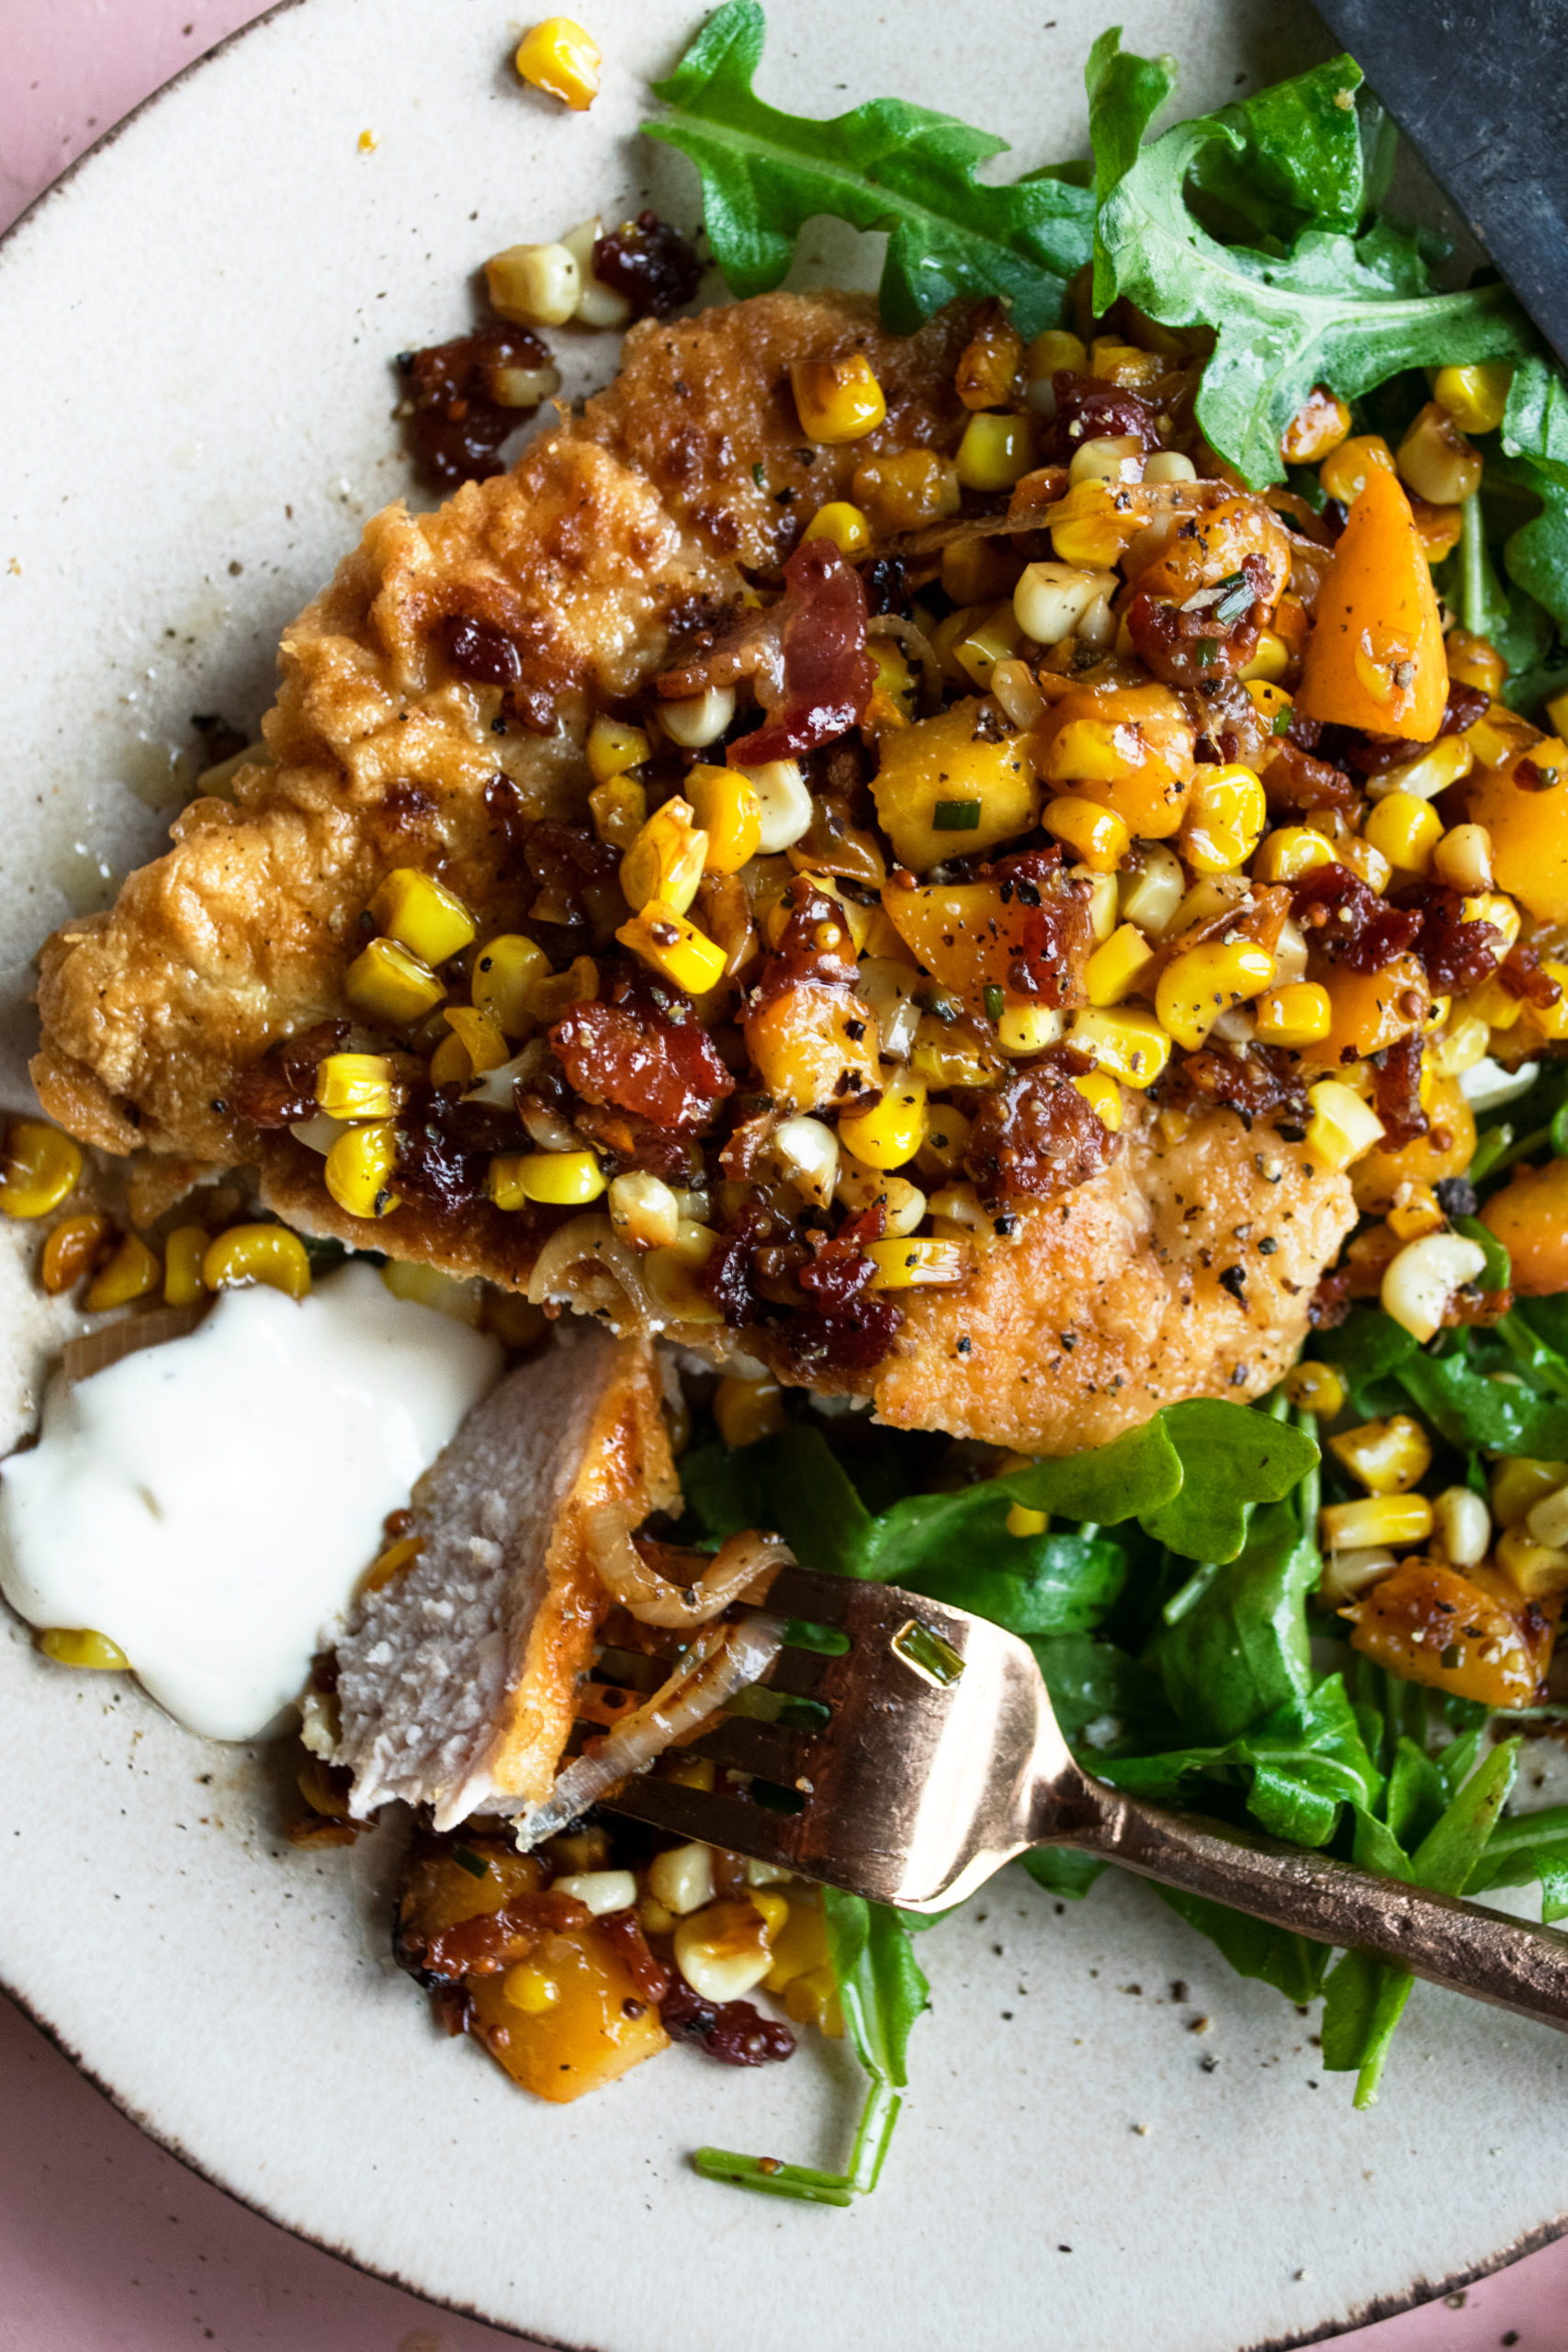 Breaded Pork Chops with Caramelized Corn - The Original Dish